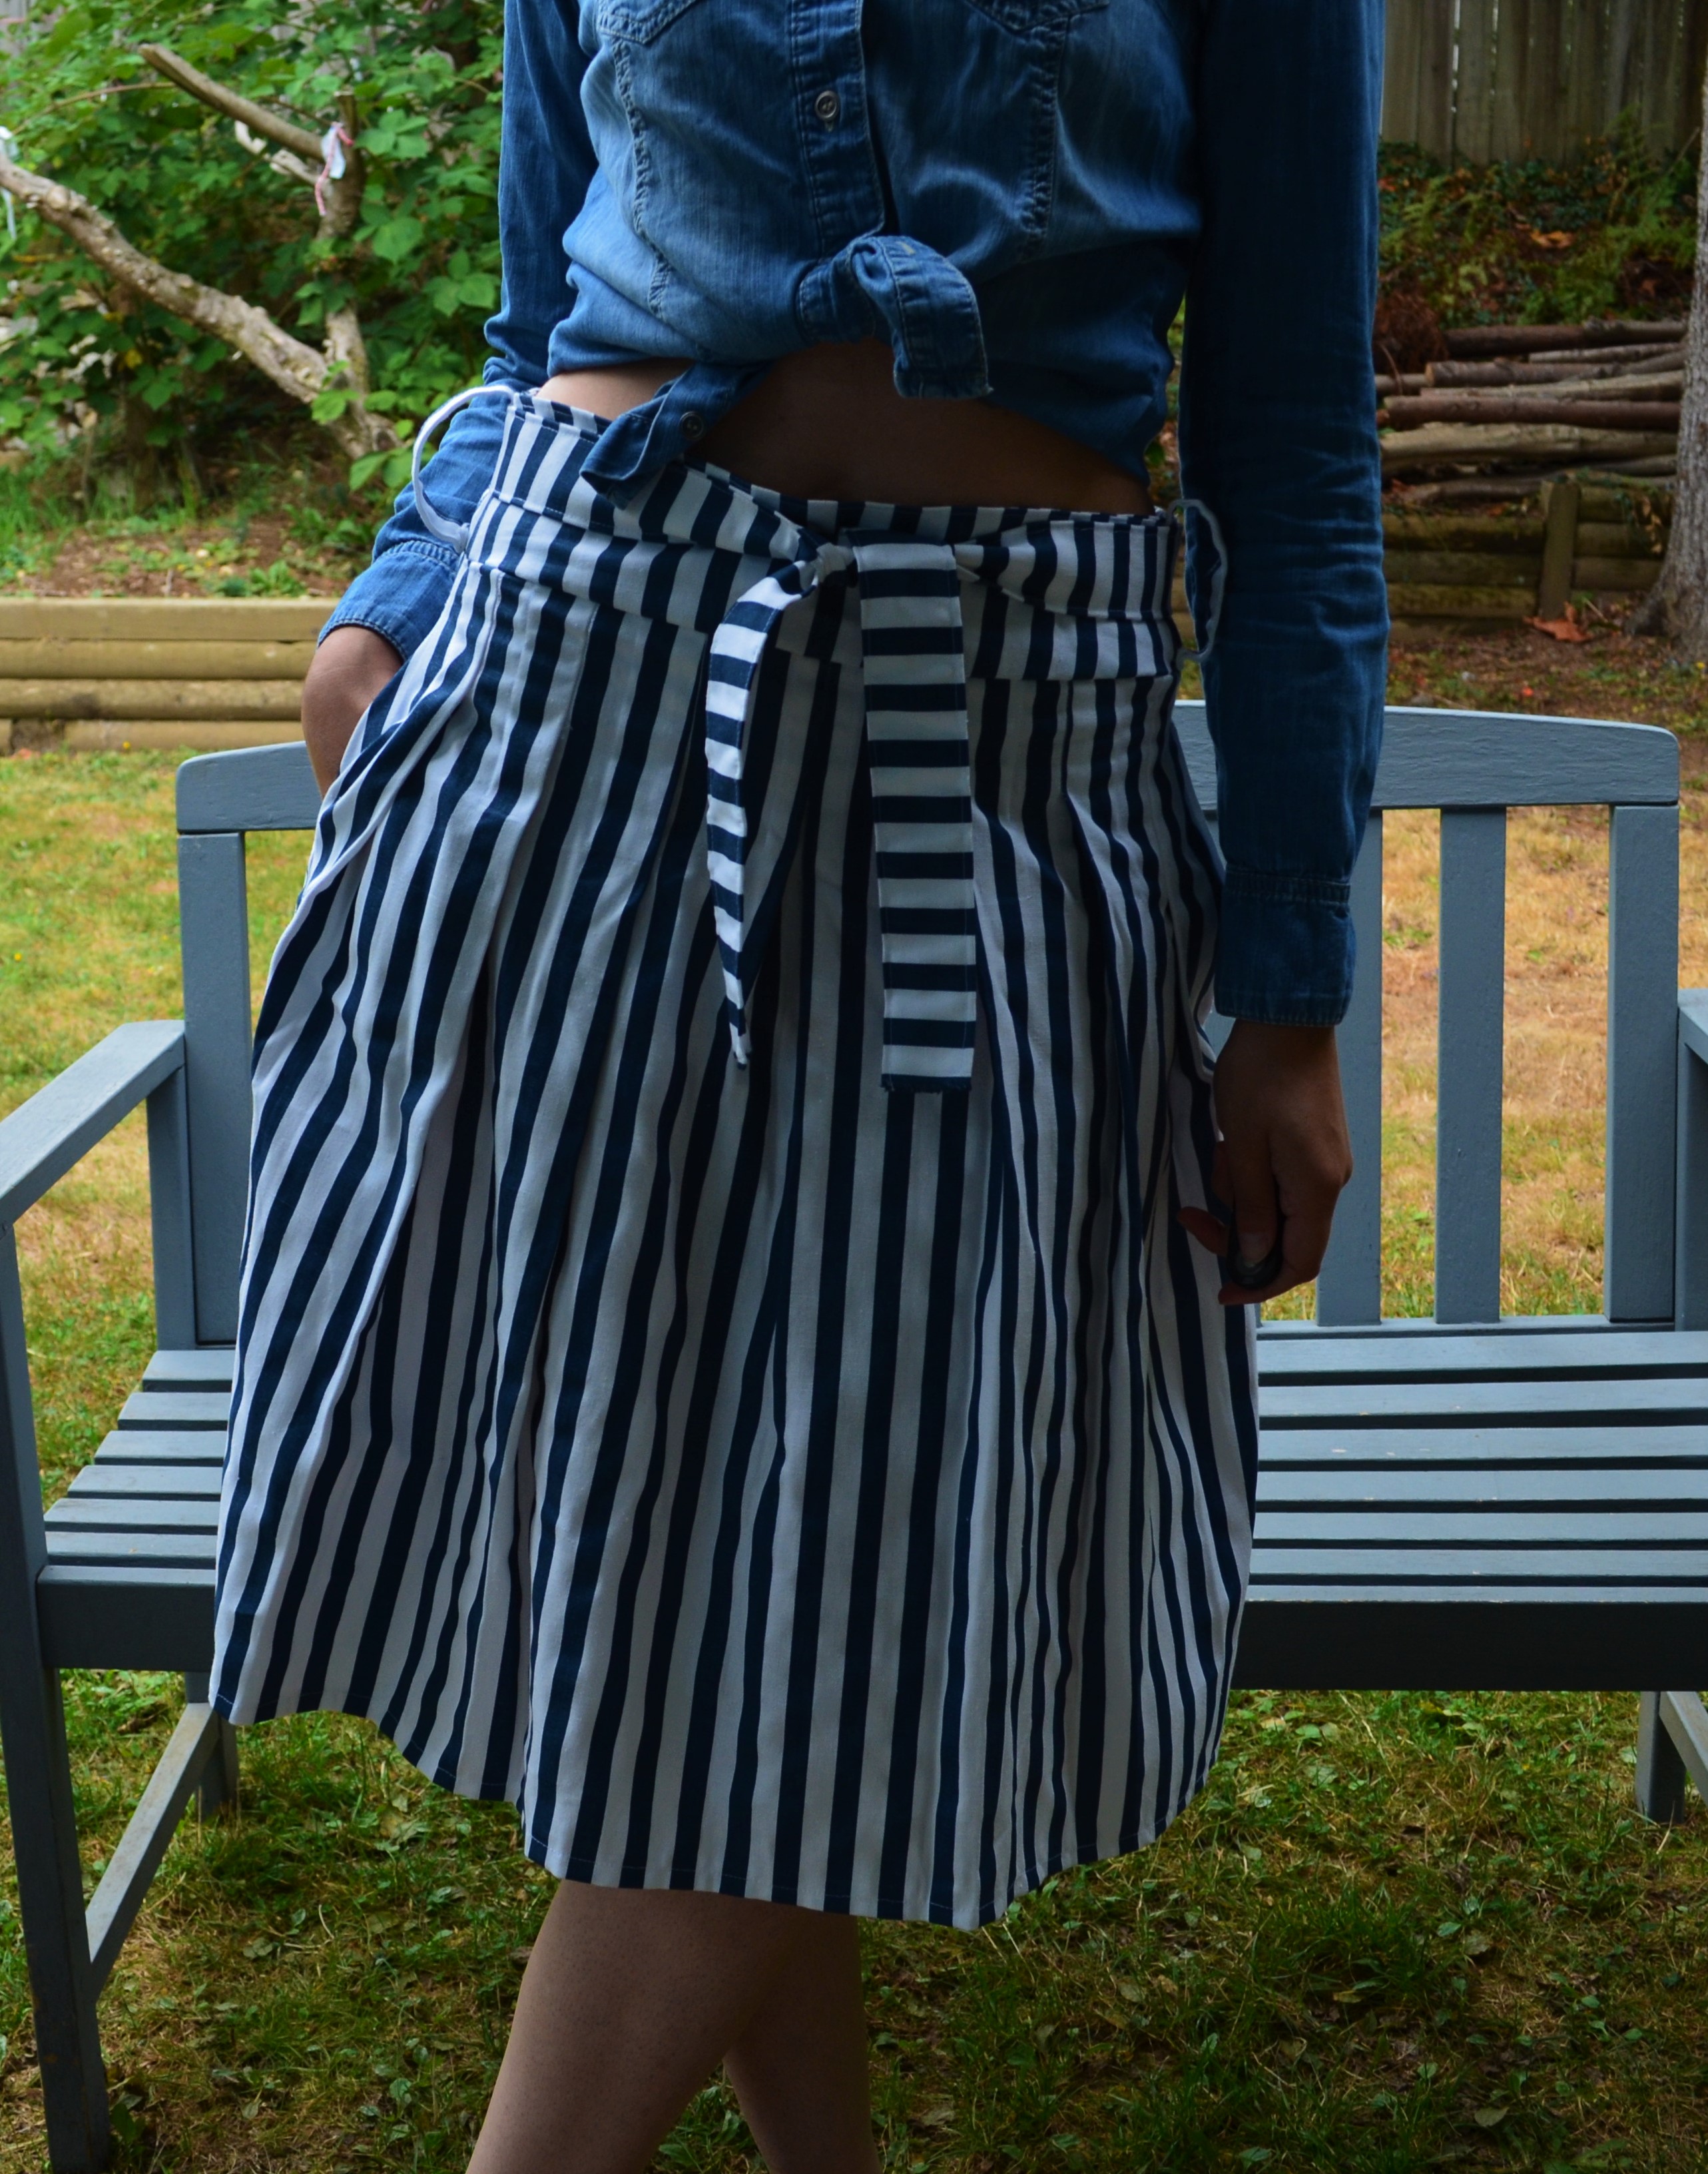 FREE SEWING PATTERN: The Pleated skirt pattern | On the Cutting Floor ...